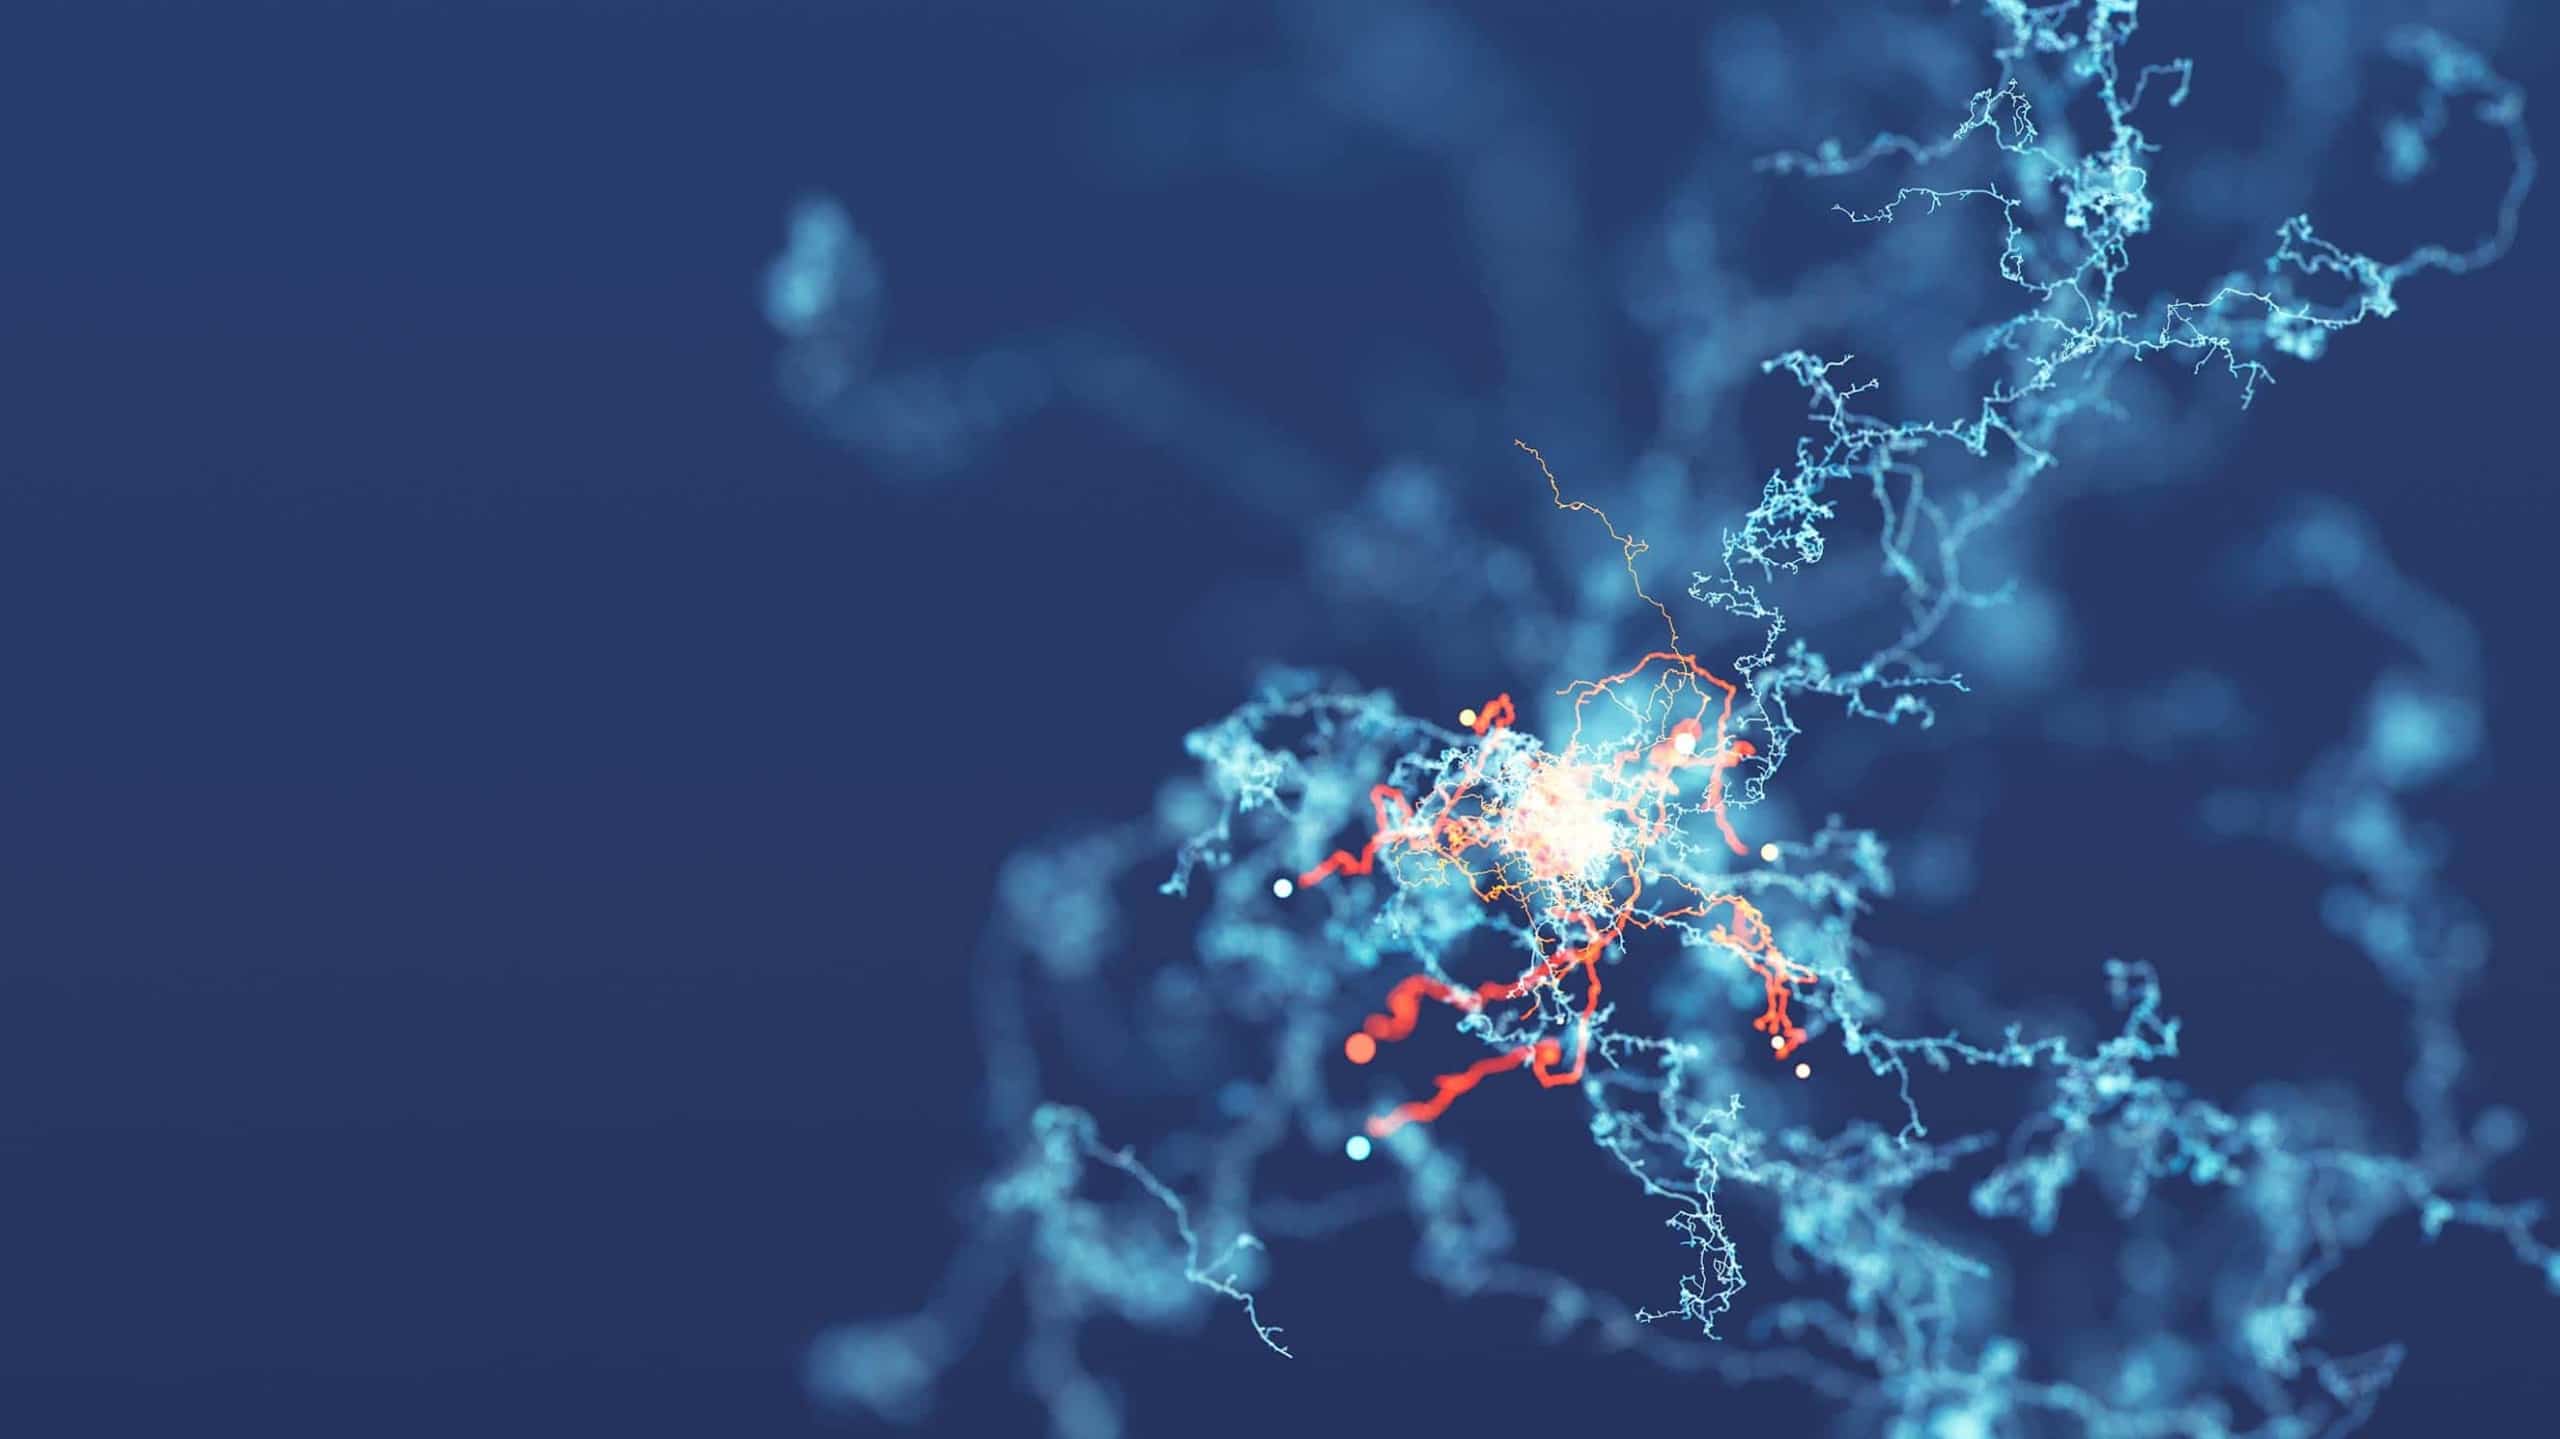 Digital illustration of a complex molecular structure glowing in blue and orange hues against a dark blue background, representing scientific research or molecular biology.